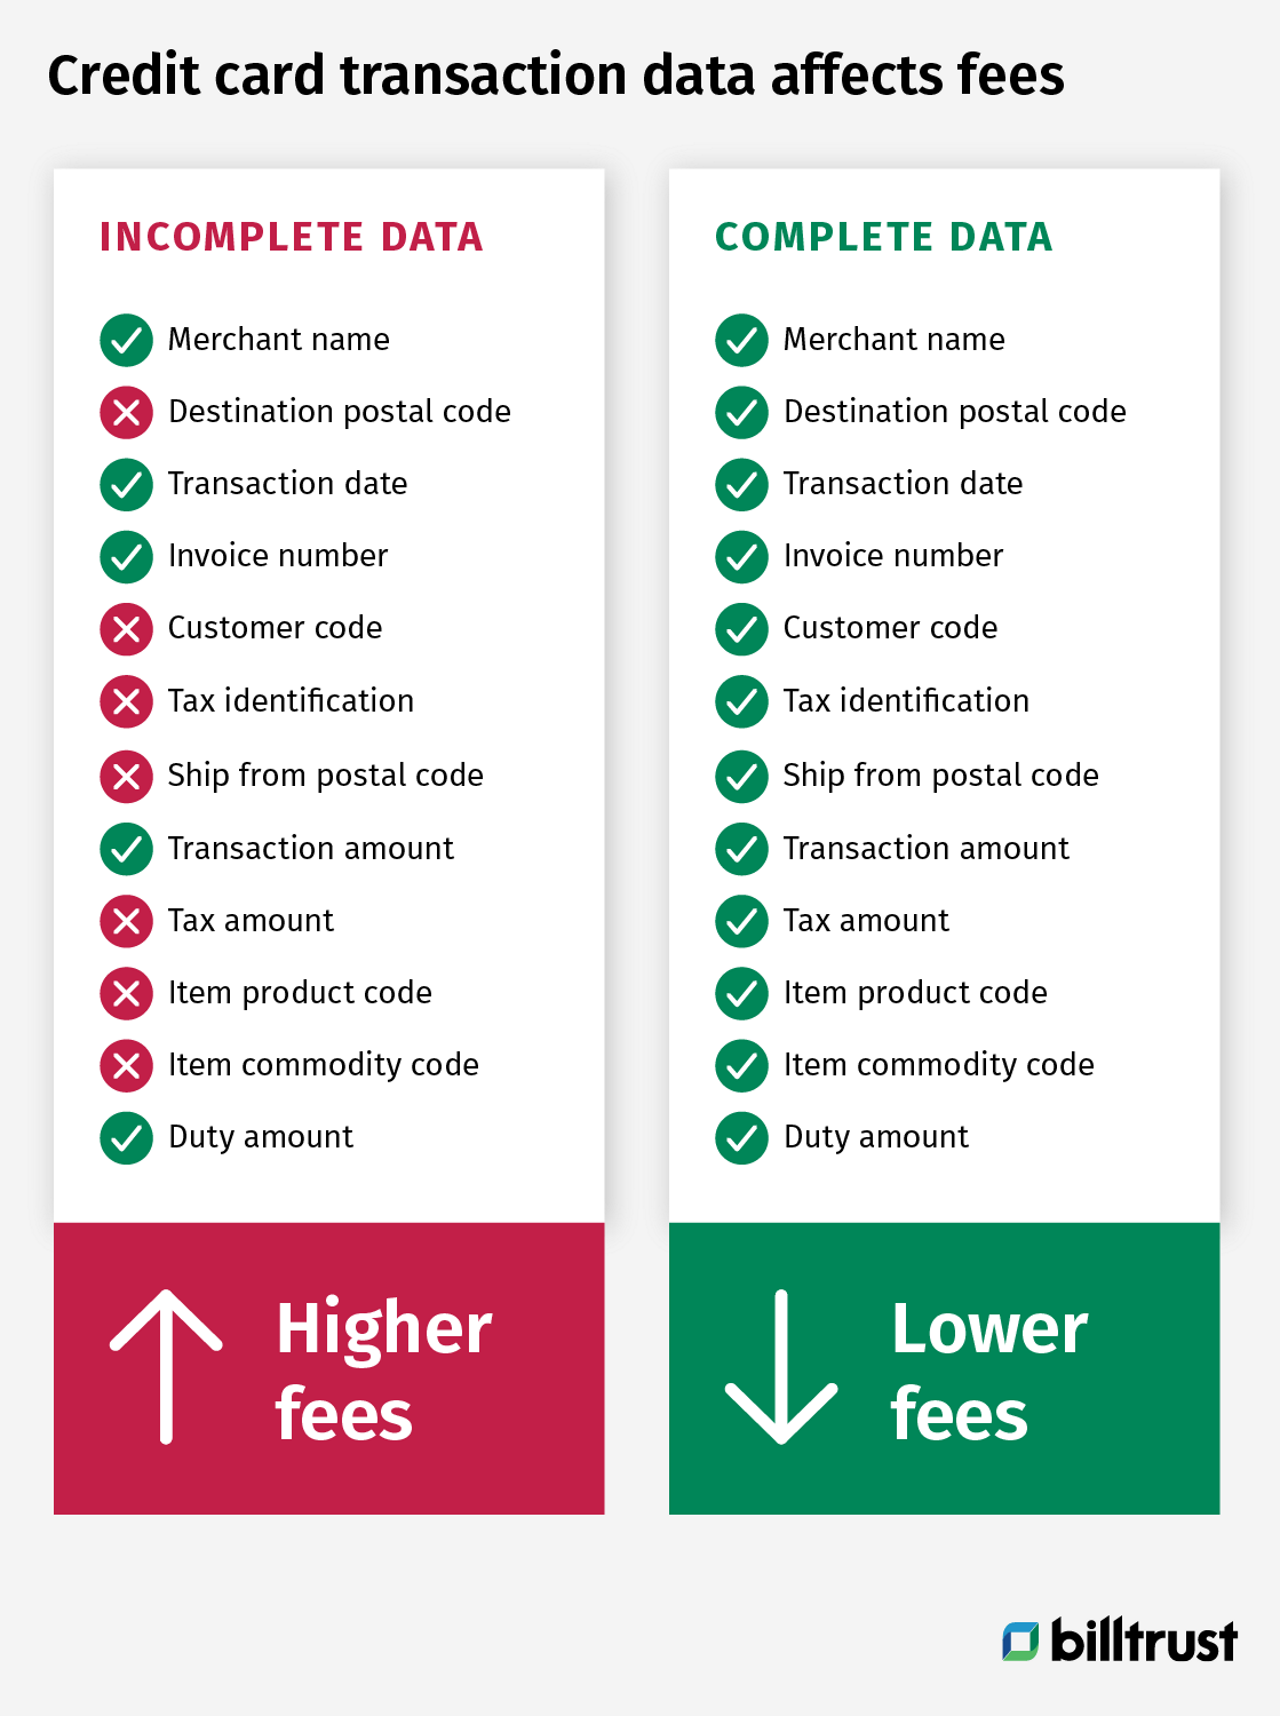 diagram showing how incomplete and complete credit card data affects fees